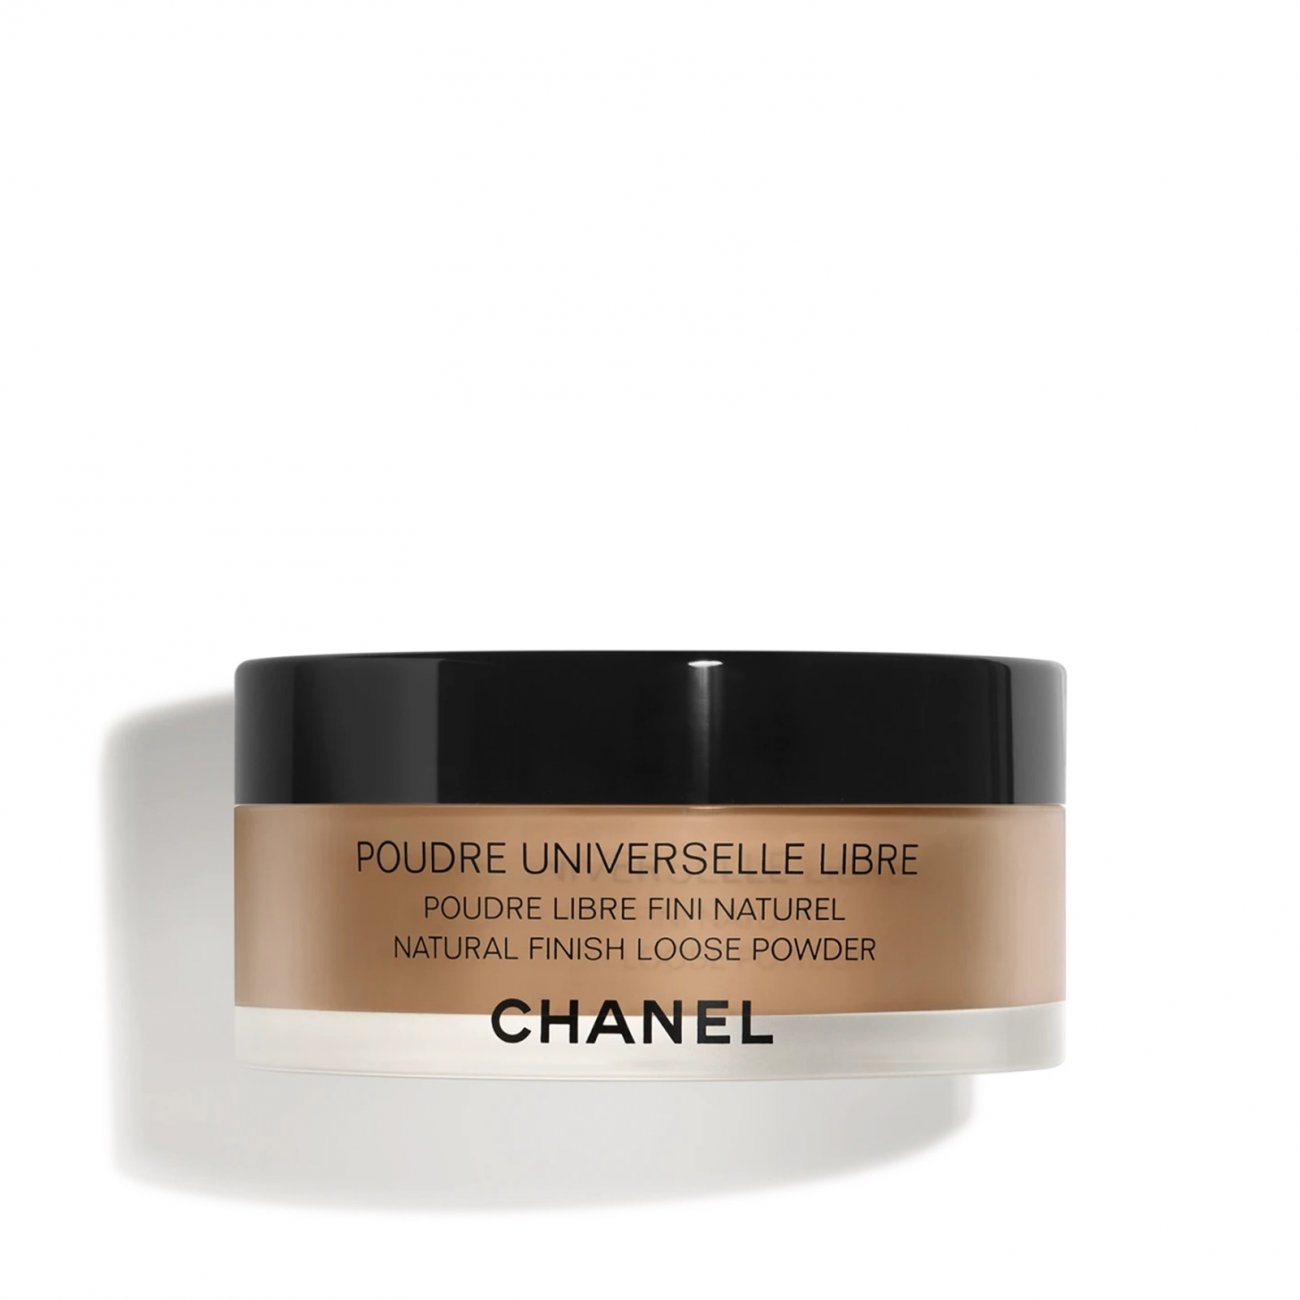 Unsung Heroes: Chanel Poudres Universelle Libre Natural Finish Loose Powder  - Makeup and Beauty Blog